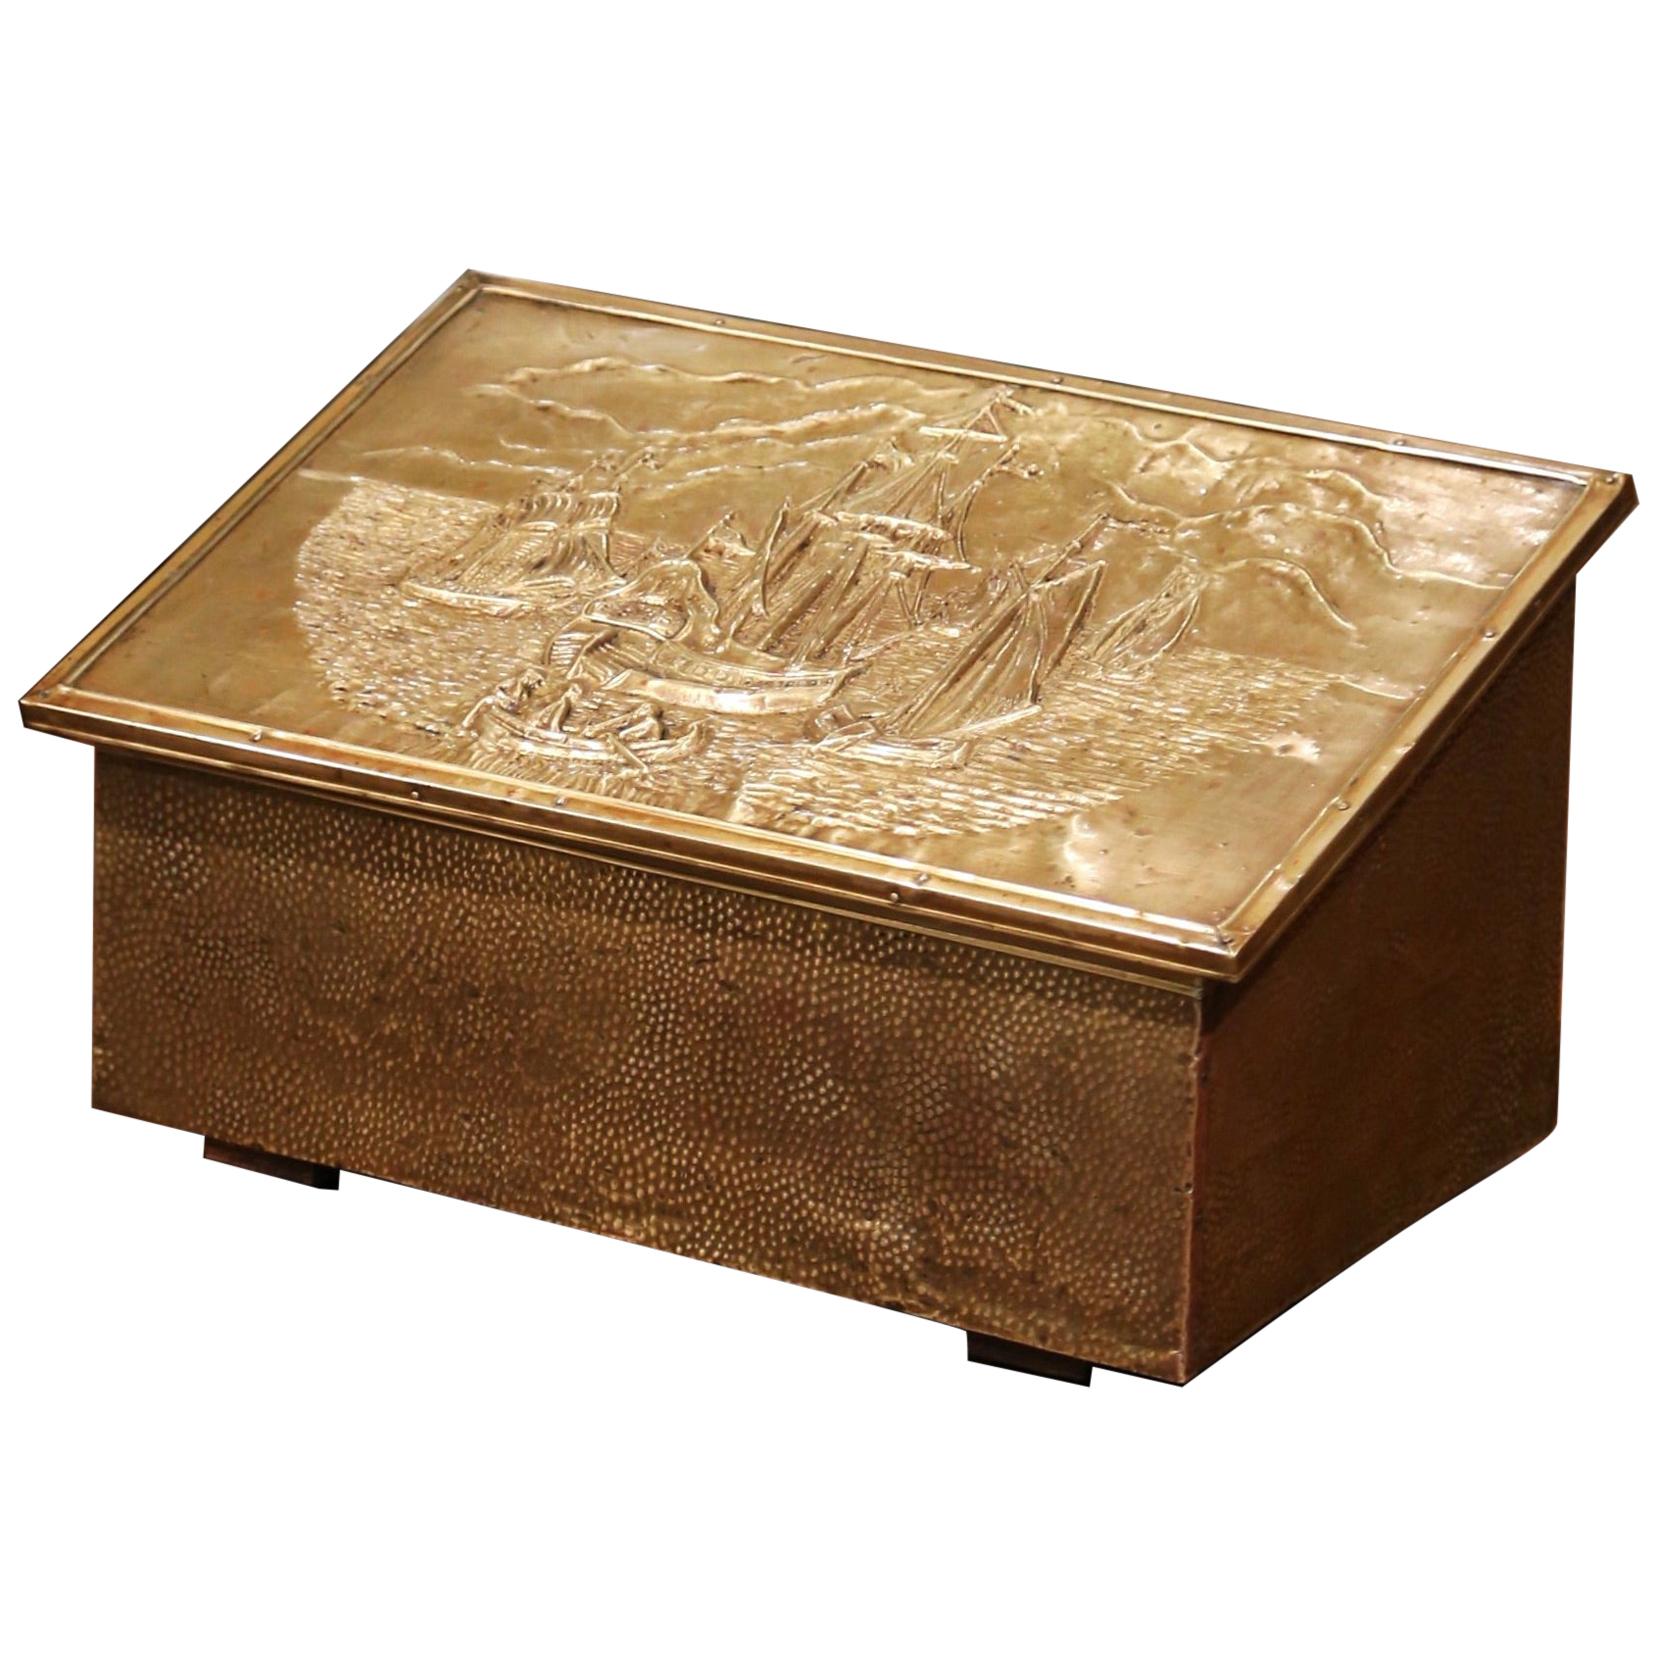 Early 20th Century French Repousse Brass and Wooden Box with Sailboats Decor For Sale